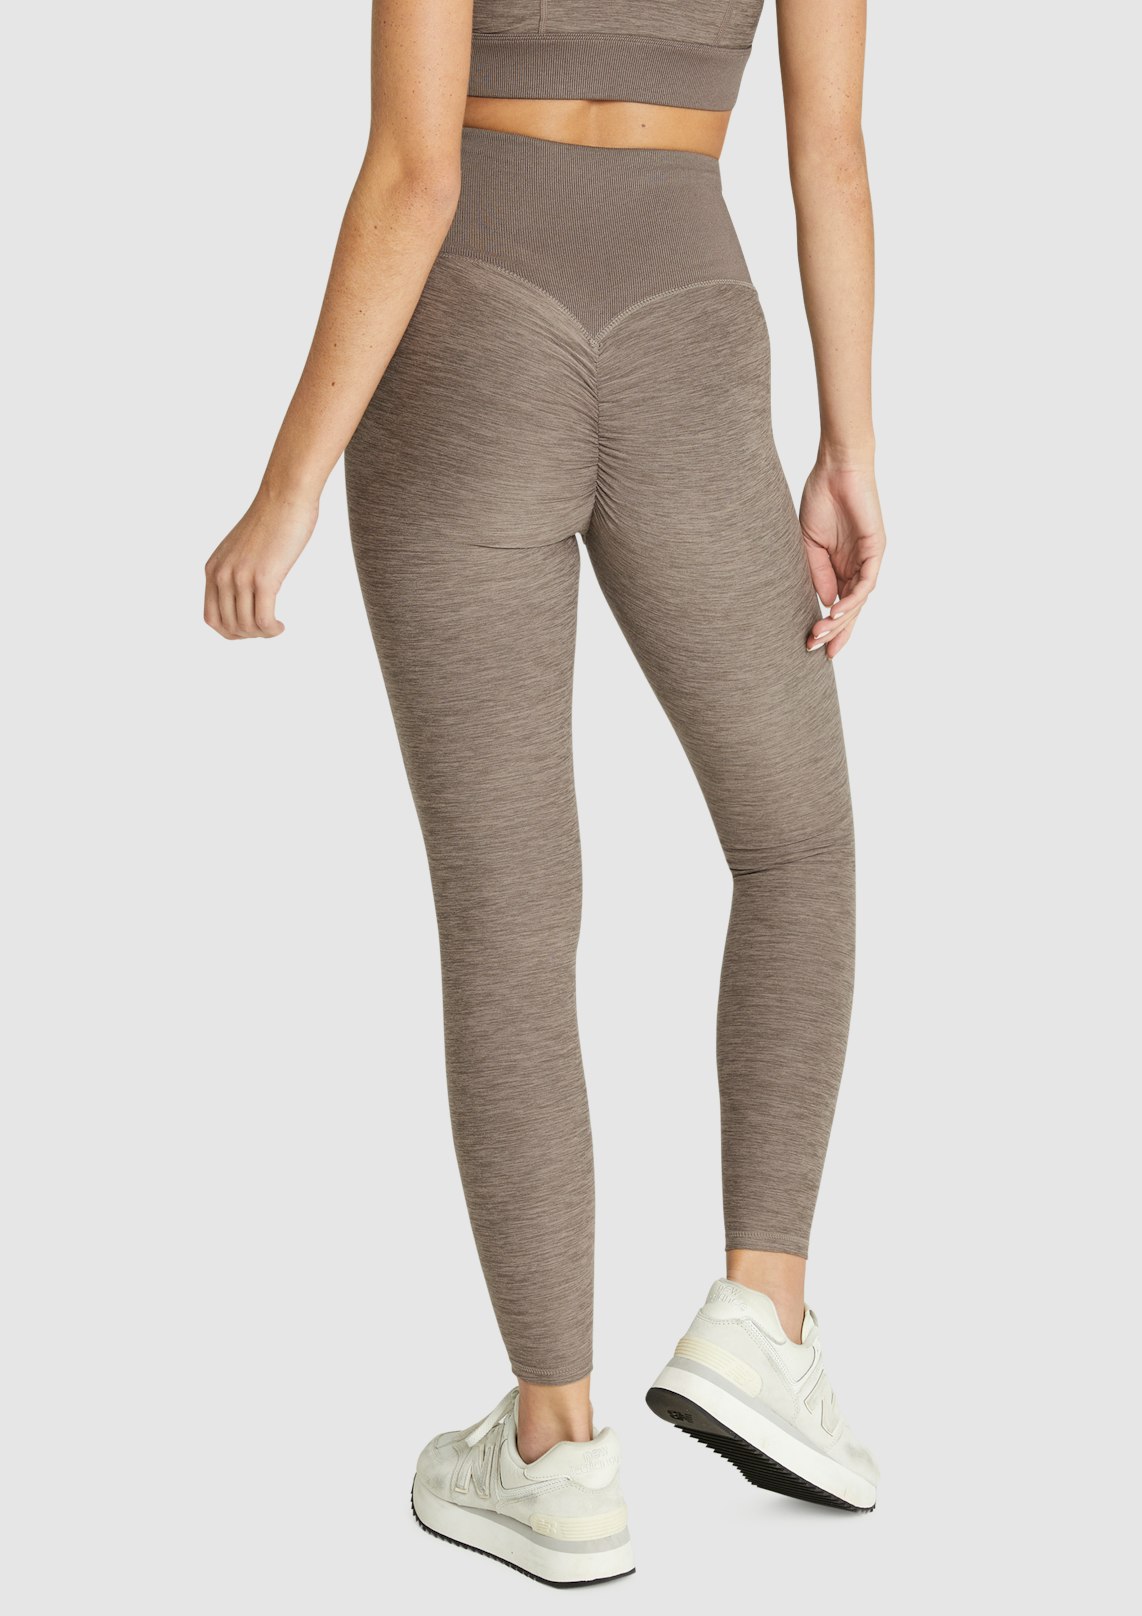 All In Motion NWT Womens Brushed Sculpt HighRise Leggings Bright